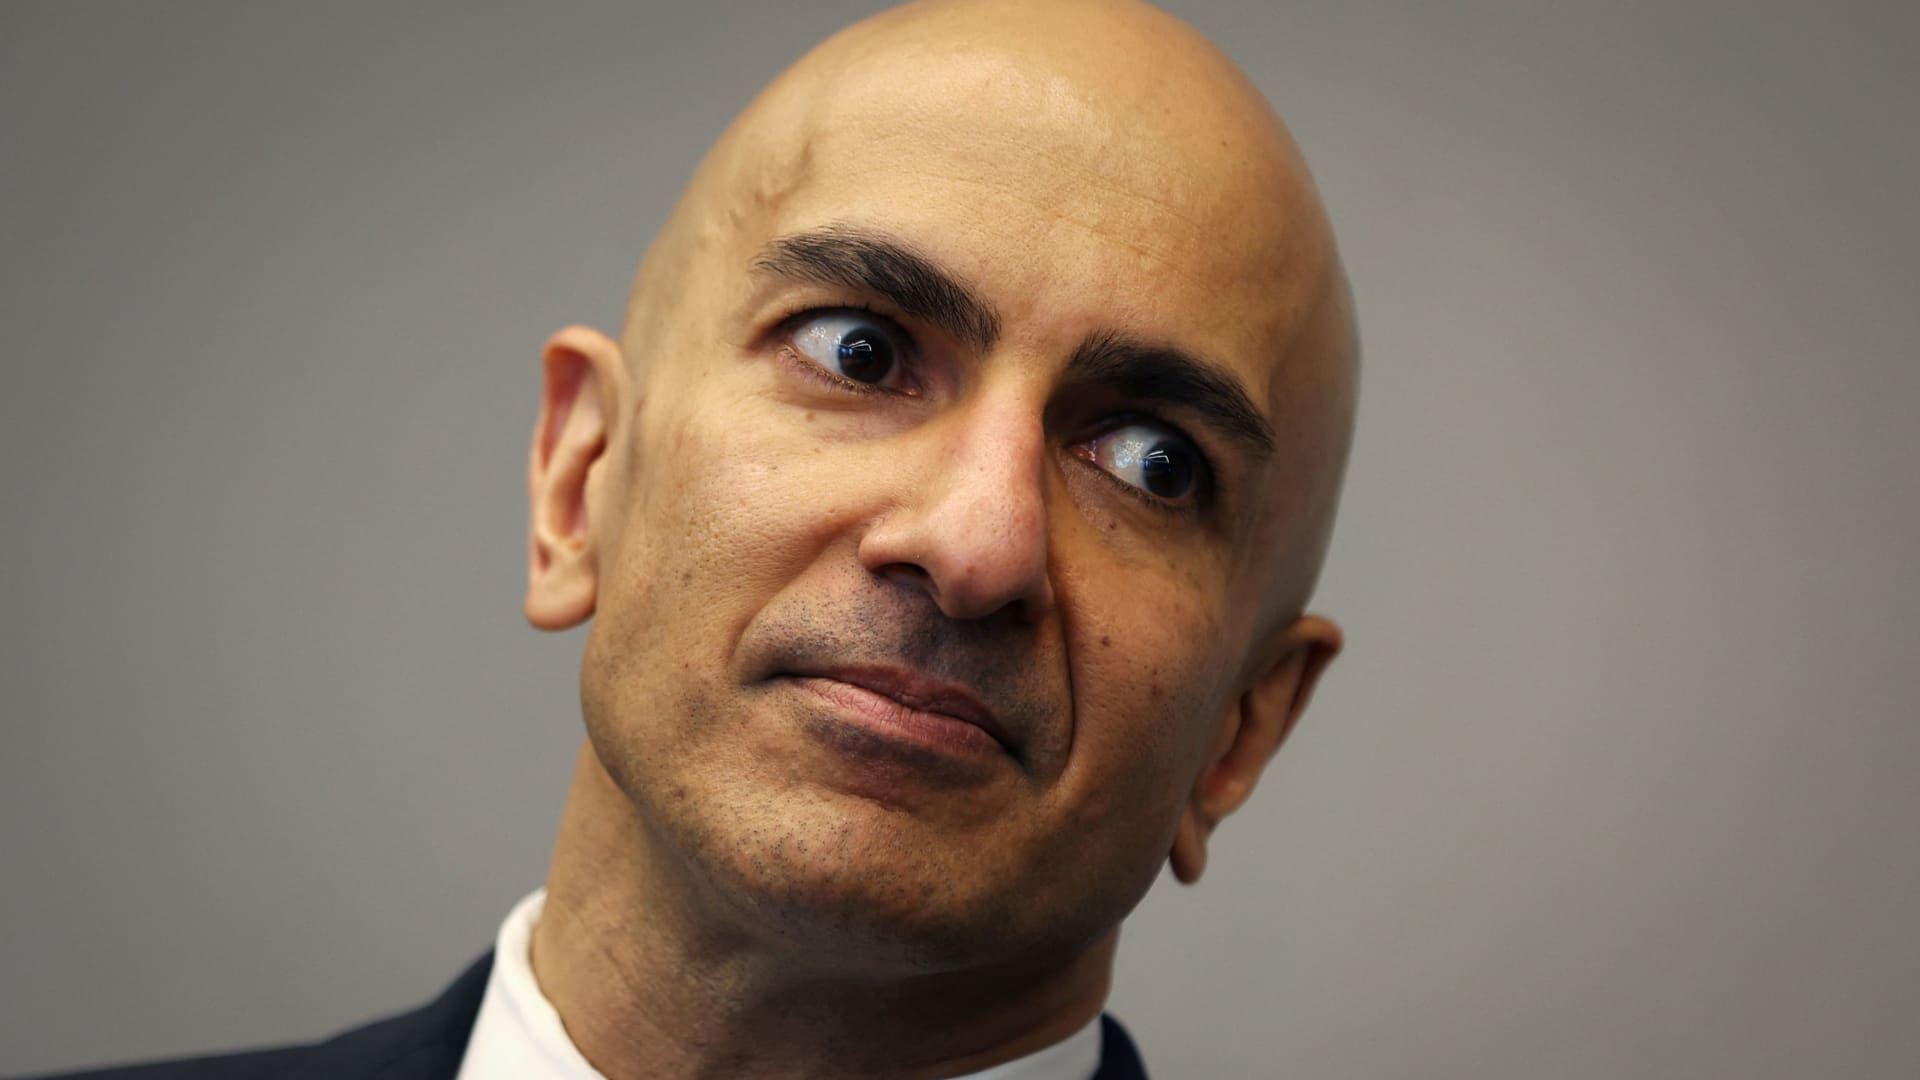 Fed’s Kashkari sees 40% chance of ‘meaningfully higher’ interest rates